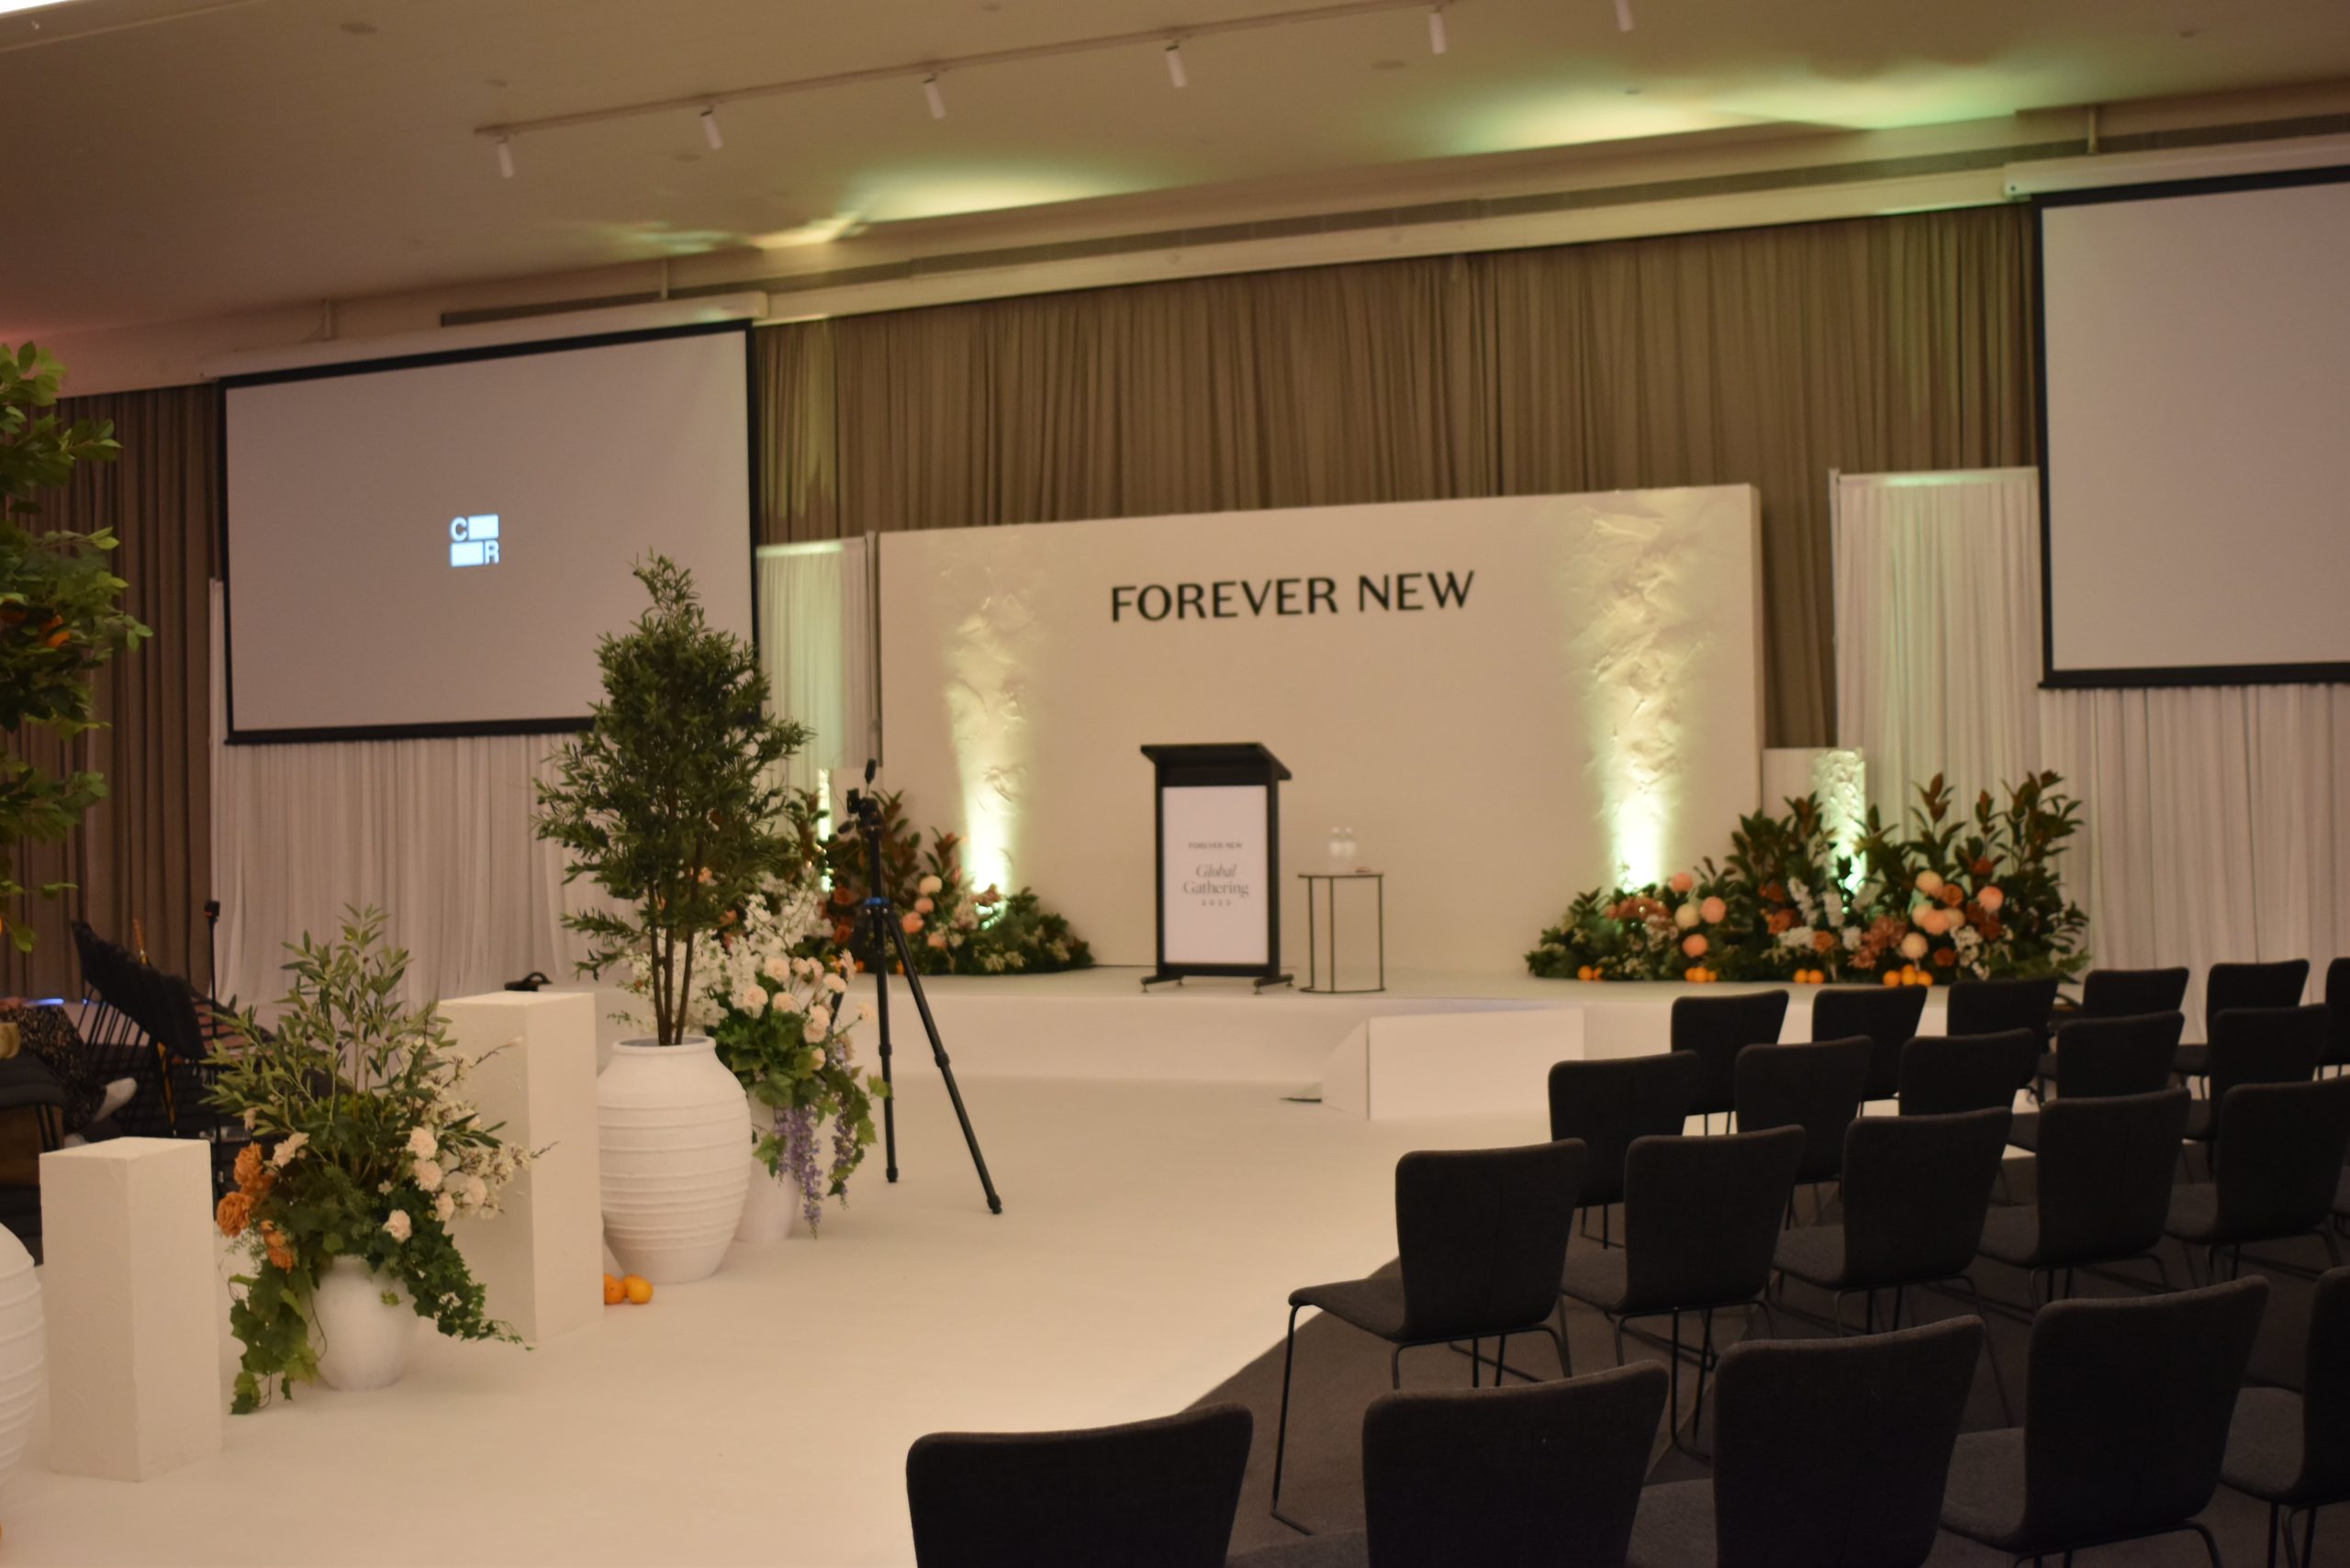 A fashion runway stage adorned with a podium and beautiful flowers, set for a stylish event.